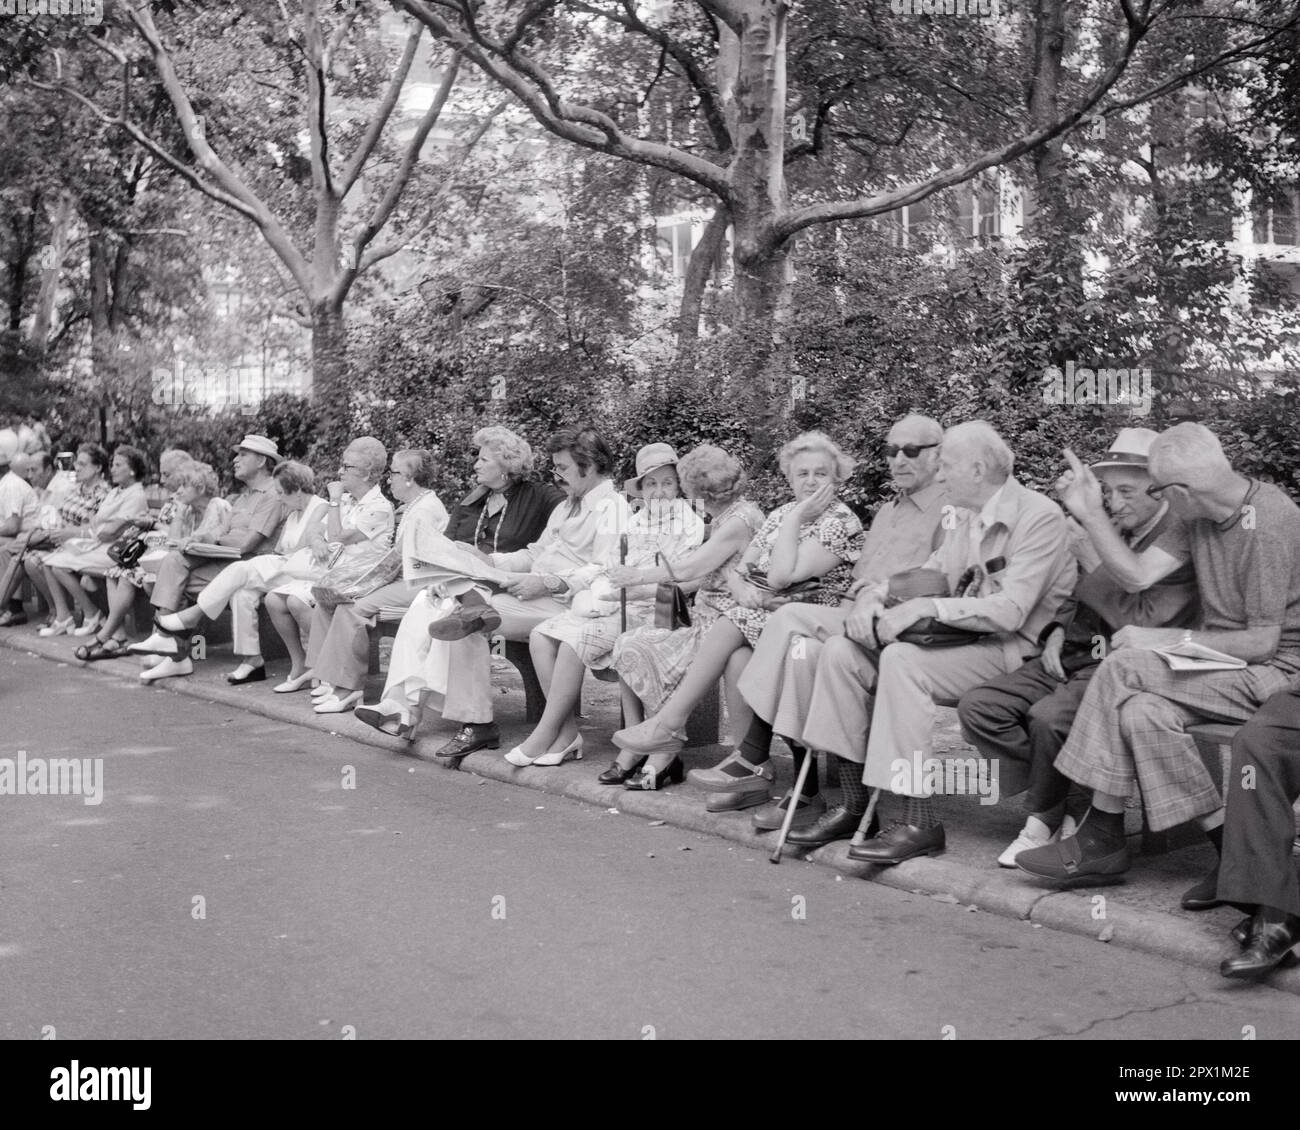 1970s LONG BENCH IN CITY PARK WITH ALL ELDERLY MEN AND WOMEN SEATED WITH THE EXCEPTION OF ONE YOUNGER MAN - s21144 HAR001 HARS UNITED STATES COPY SPACE FRIENDSHIP HALF-LENGTH LADIES PERSONS UNITED STATES OF AMERICA MALES RETIREMENT SENIOR MAN SENIOR ADULT B&W SUMMERTIME SENIOR WOMAN RETIREE OLD AGE OLDSTERS OLDSTER LEISURE CANES AND AGING RECREATION OPPORTUNITY NYC ELDERS CONNECTION CONCEPTUAL NEW YORK CITIES RETIREES SUPPORT NEW YORK CITY PANORAMIC COOPERATION RELAXATION SEASON TOGETHERNESS YOUNGER BLACK AND WHITE CAUCASIAN ETHNICITY HAR001 OLD FASHIONED Stock Photo